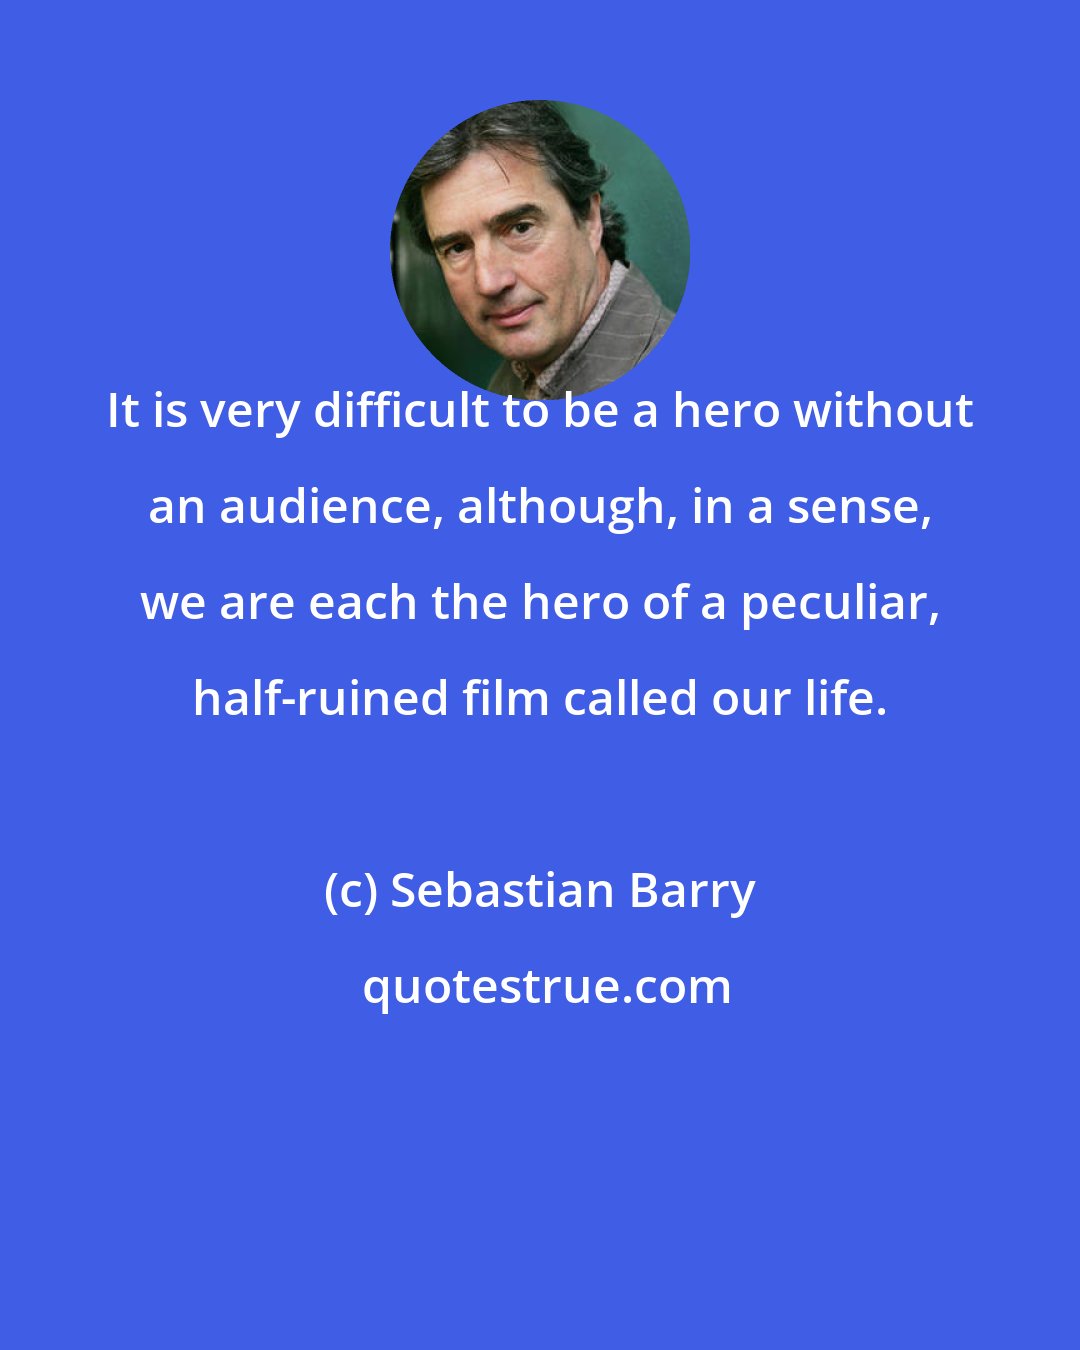 Sebastian Barry: It is very difficult to be a hero without an audience, although, in a sense, we are each the hero of a peculiar, half-ruined film called our life.